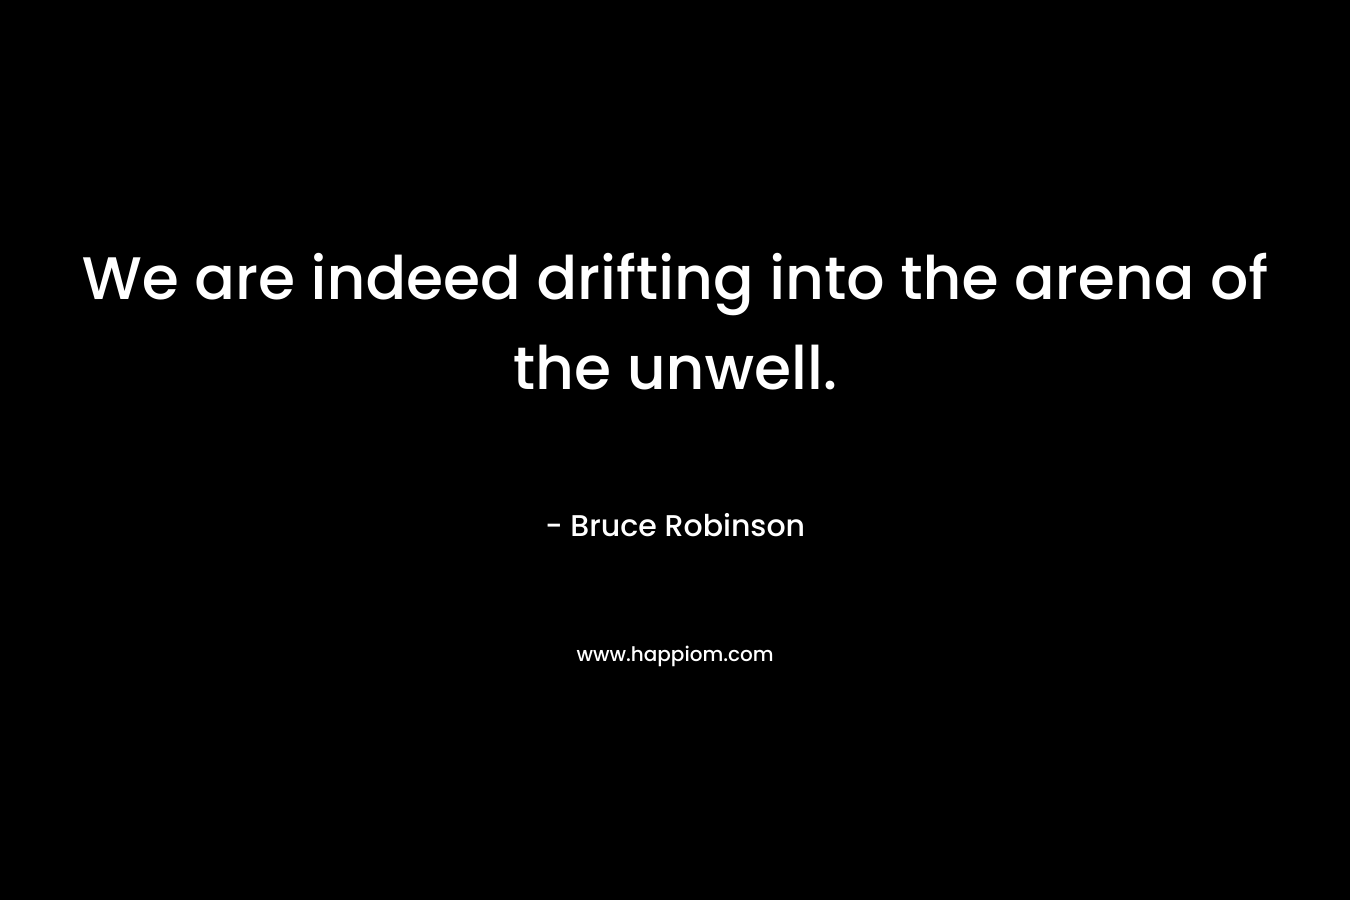 We are indeed drifting into the arena of the unwell. – Bruce Robinson